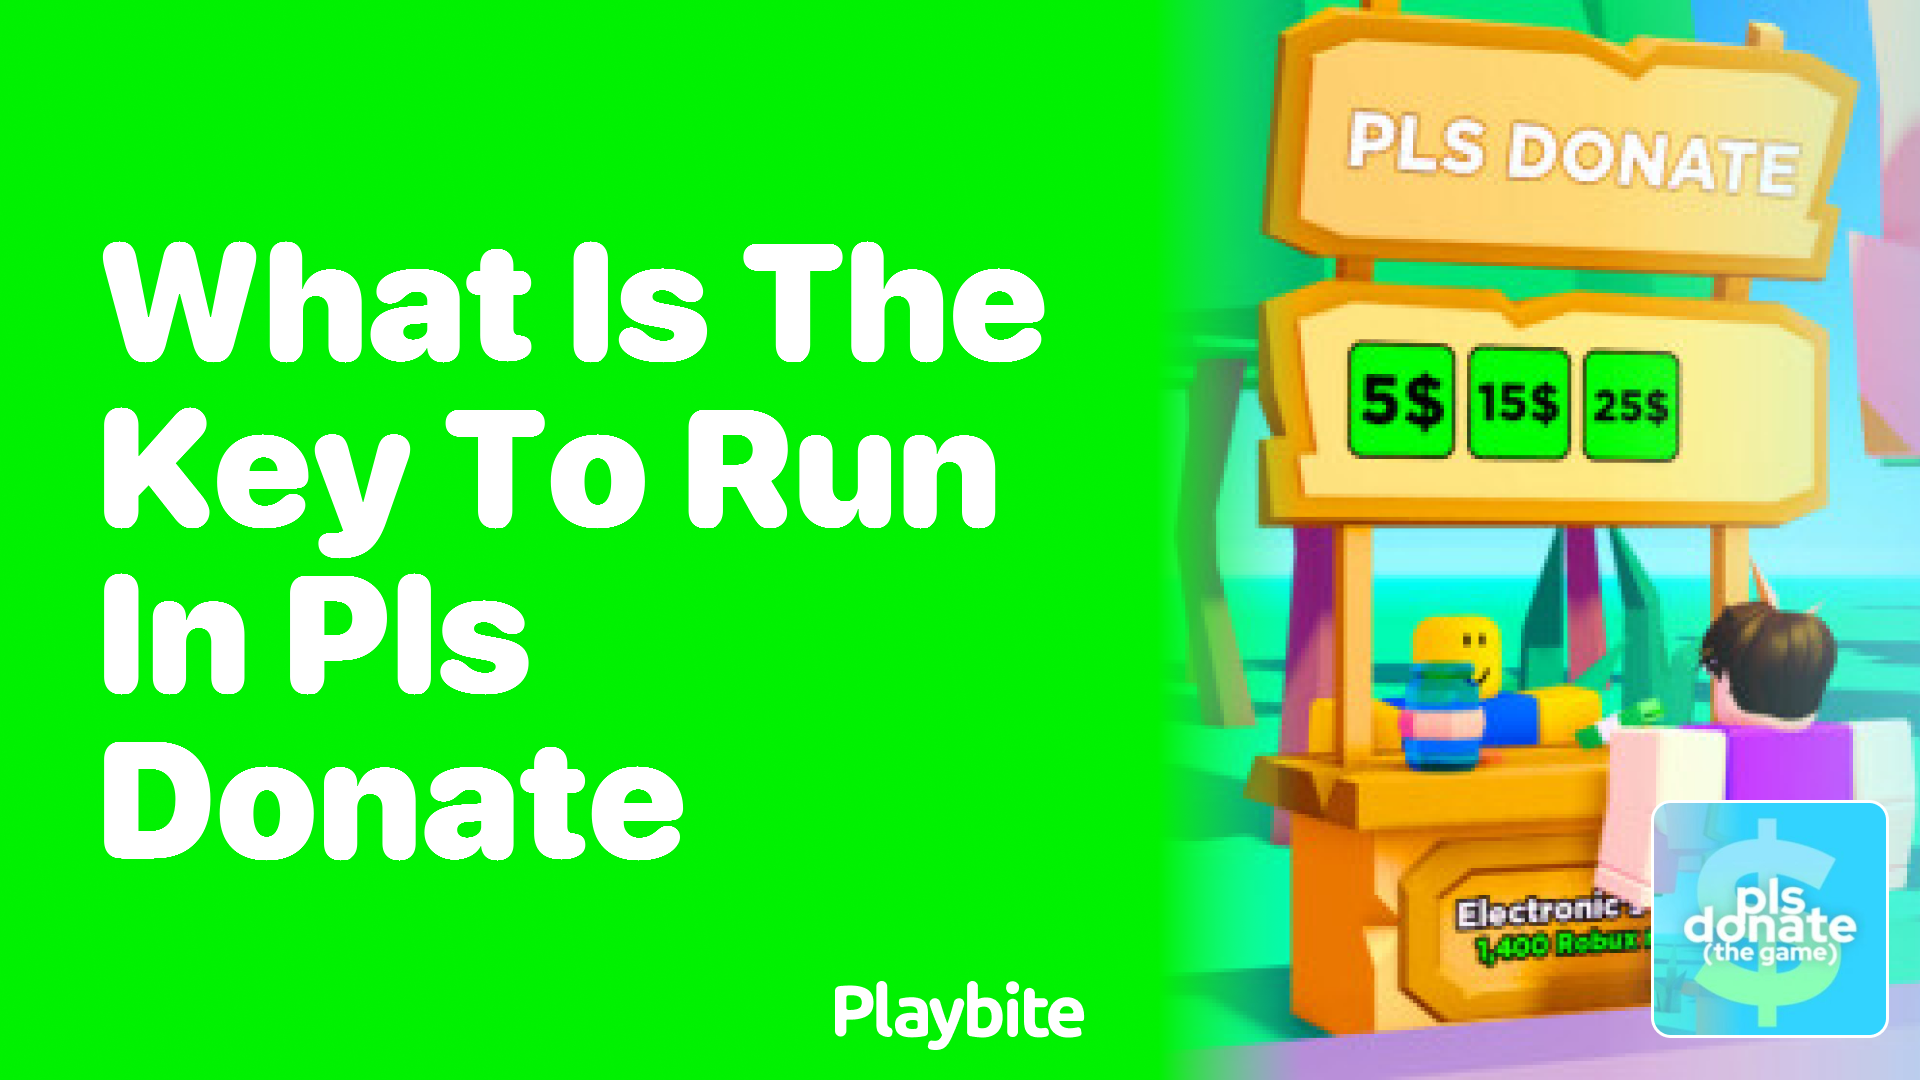 What Is the Key to Run in PLS DONATE on Roblox?